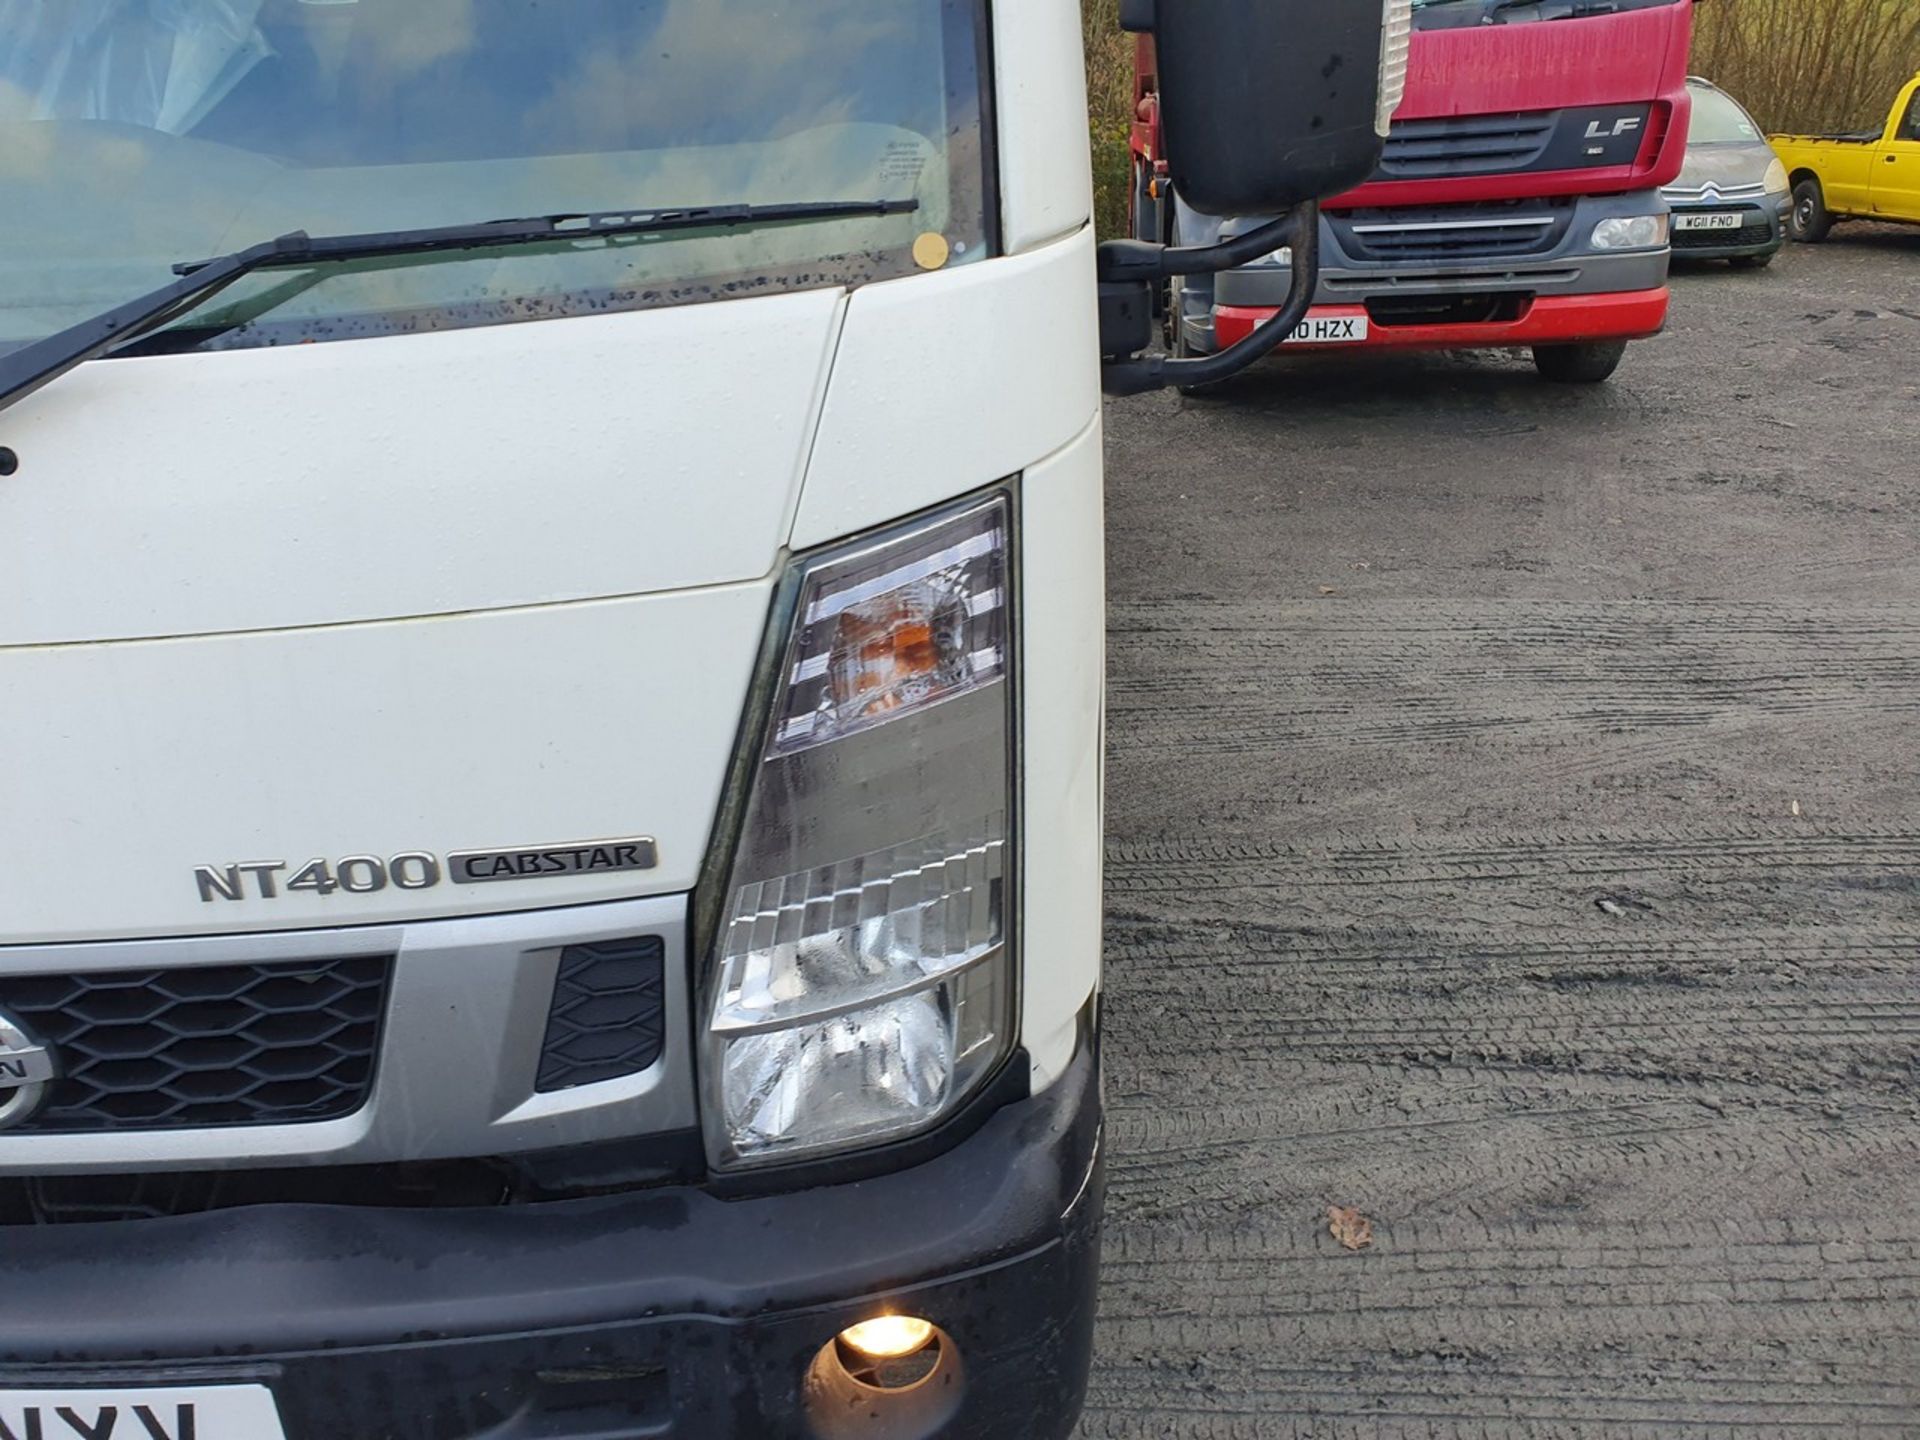 16/16 NISSAN NT400 CABSTAR 35.14 LWB D - 2488cc 2dr Flat Bed (White) - Image 21 of 33